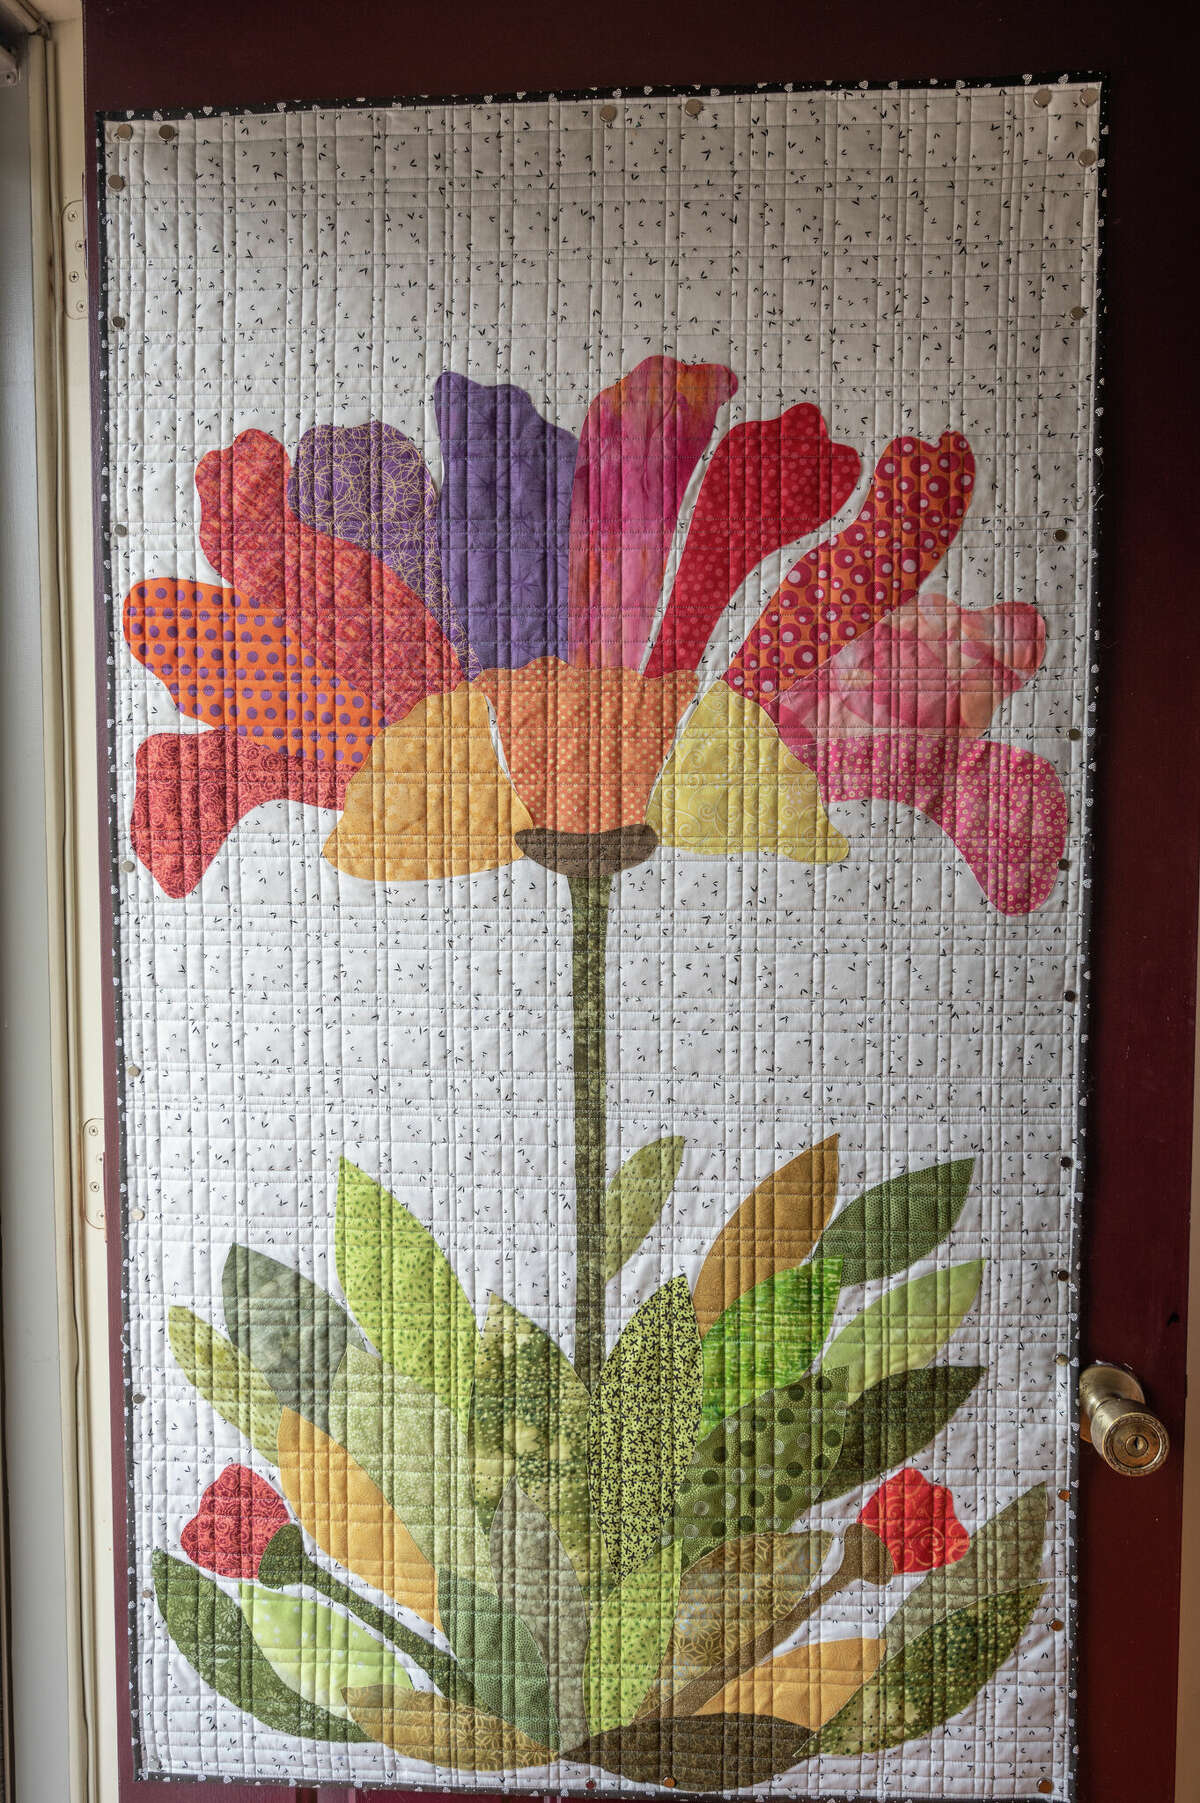 Judy Piper's front door of her Midland home is decorated with one of her quilted works. Piper and her daughter, Laura Greenfelder, are the featured quilters of this year's Midland Quilters Squared show, April 29-May 1.